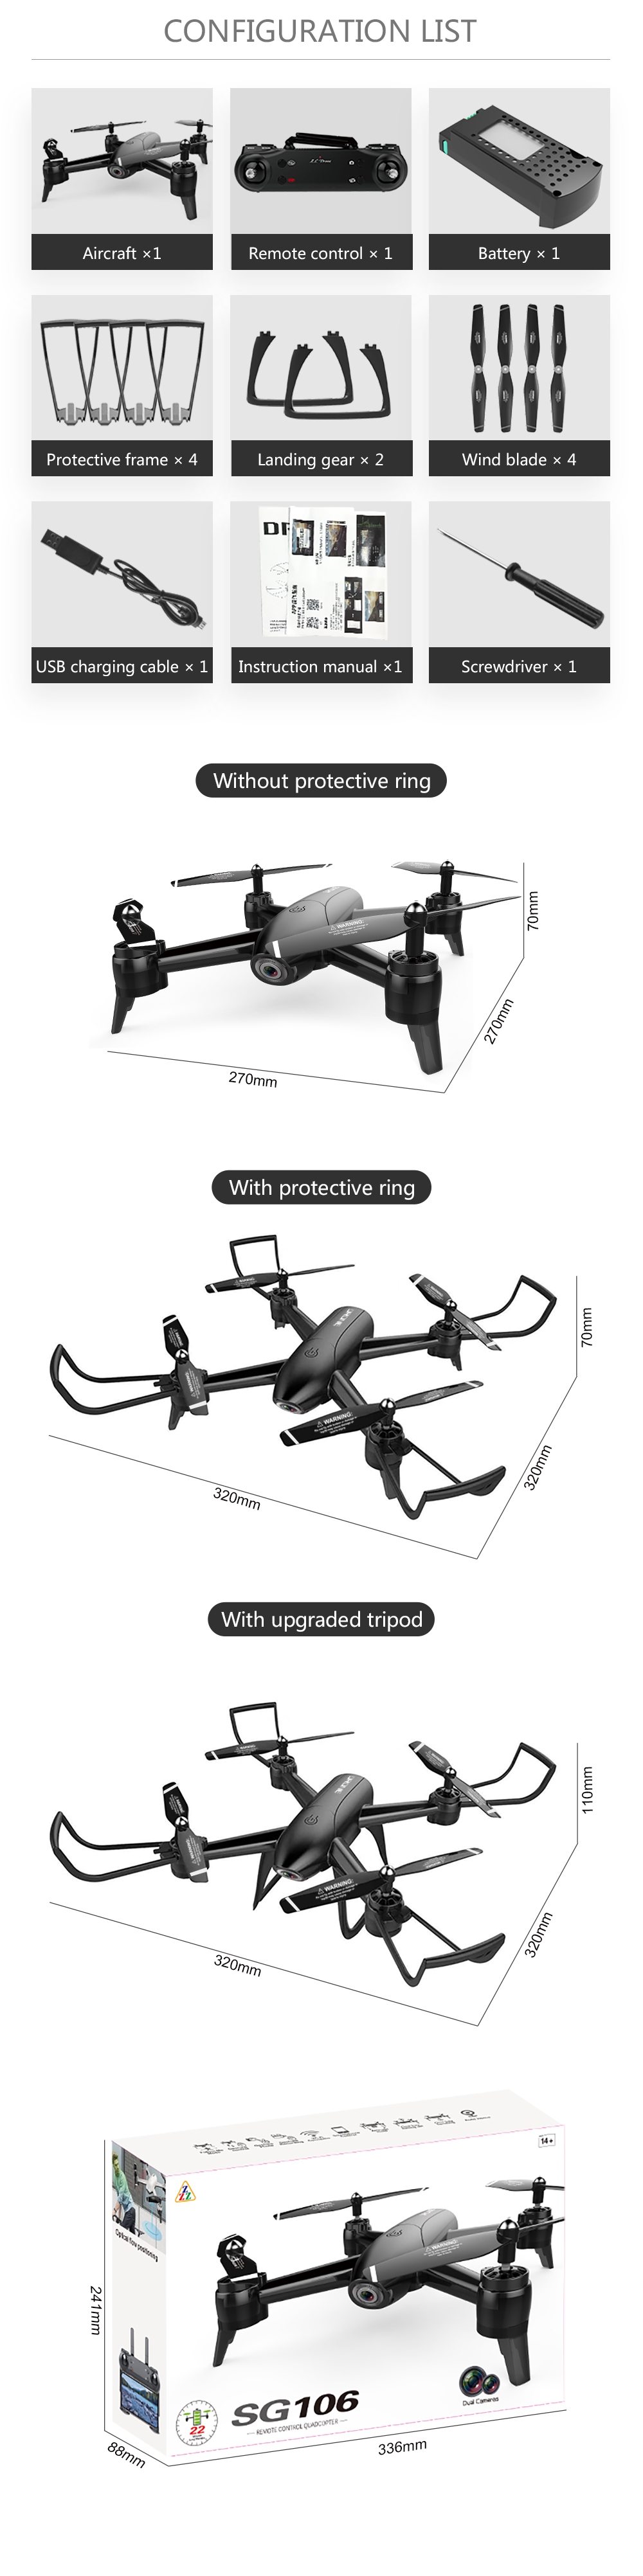 SG106 WiFi FPV With 4K / 1080P Wide Angle Camera Optical Flow Positioning RC Drone Quadcopter RTF 22